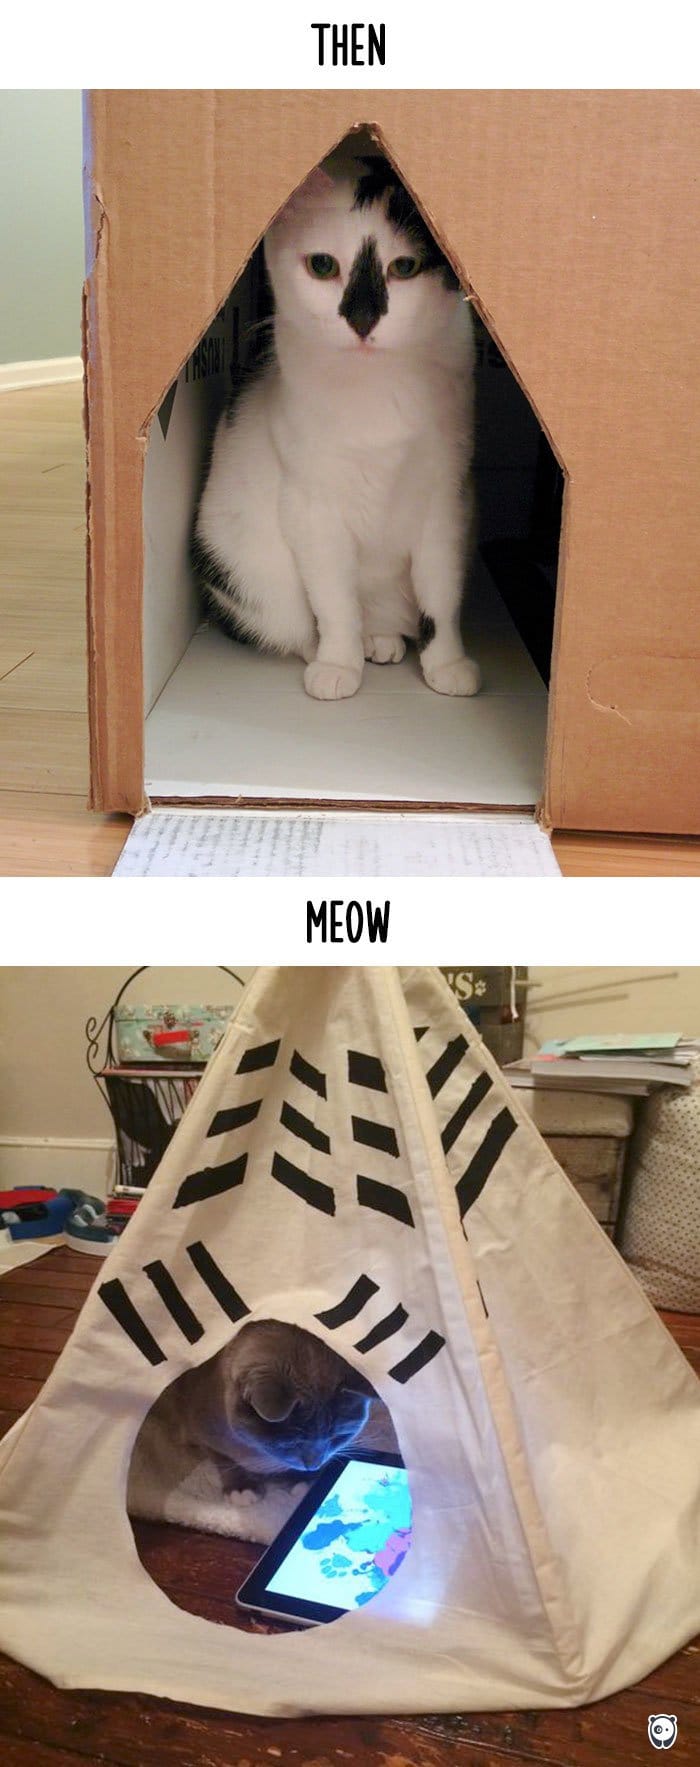 cats-then-now-housing